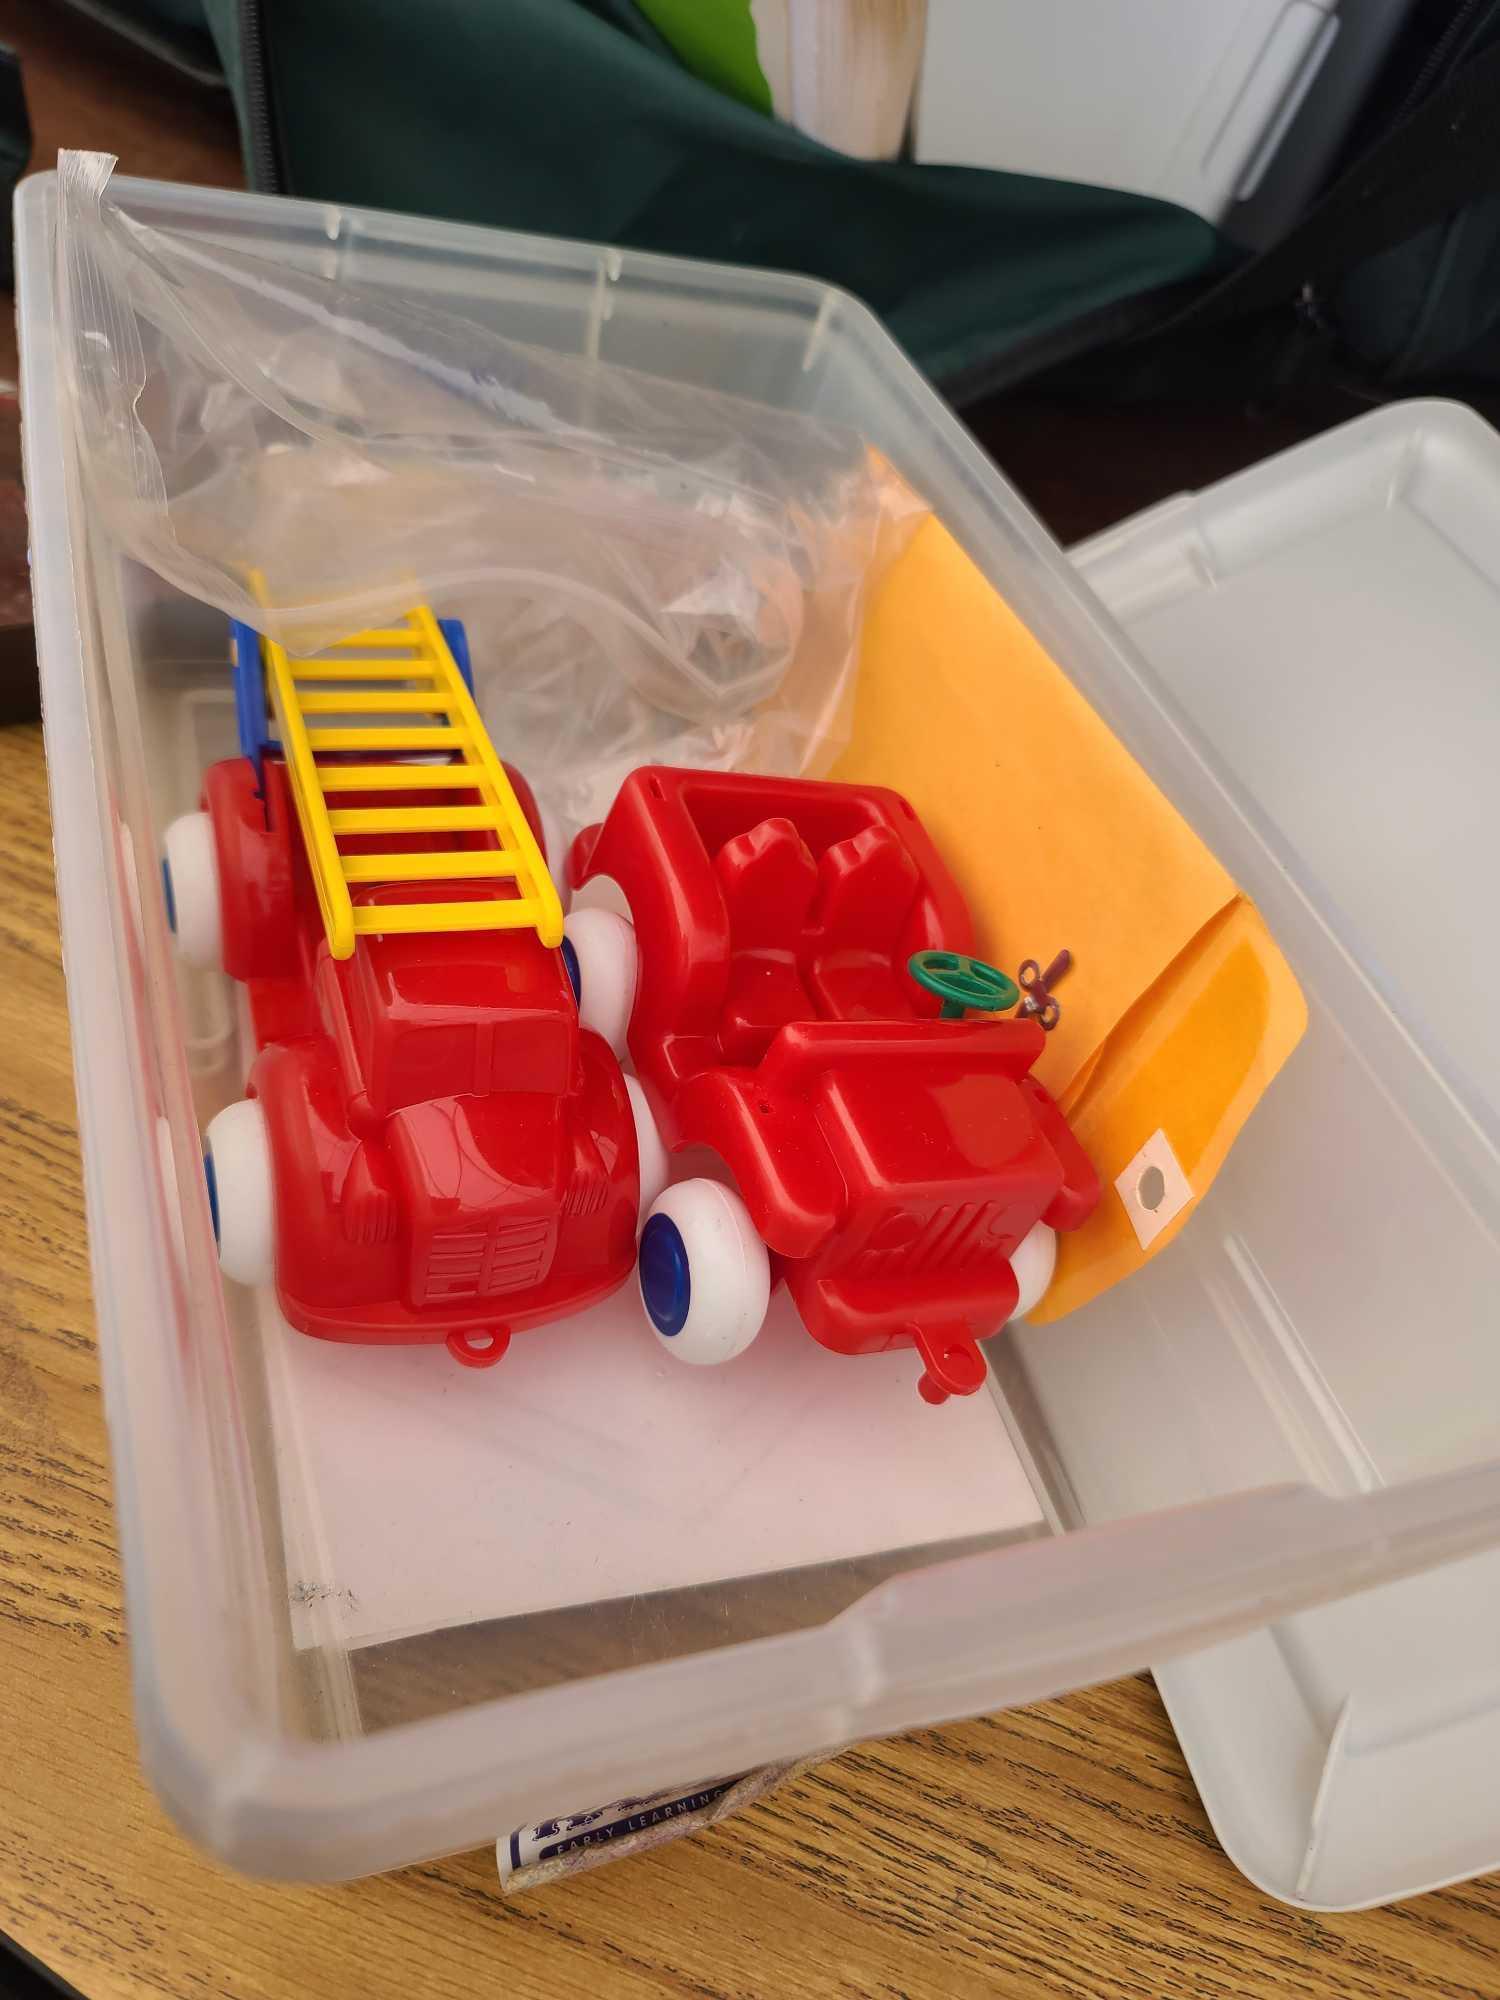 Group of Plastic Containers, Group of Building Blocks, (2) Red Toy Cars, (1) Silver Hand Bell, Plus